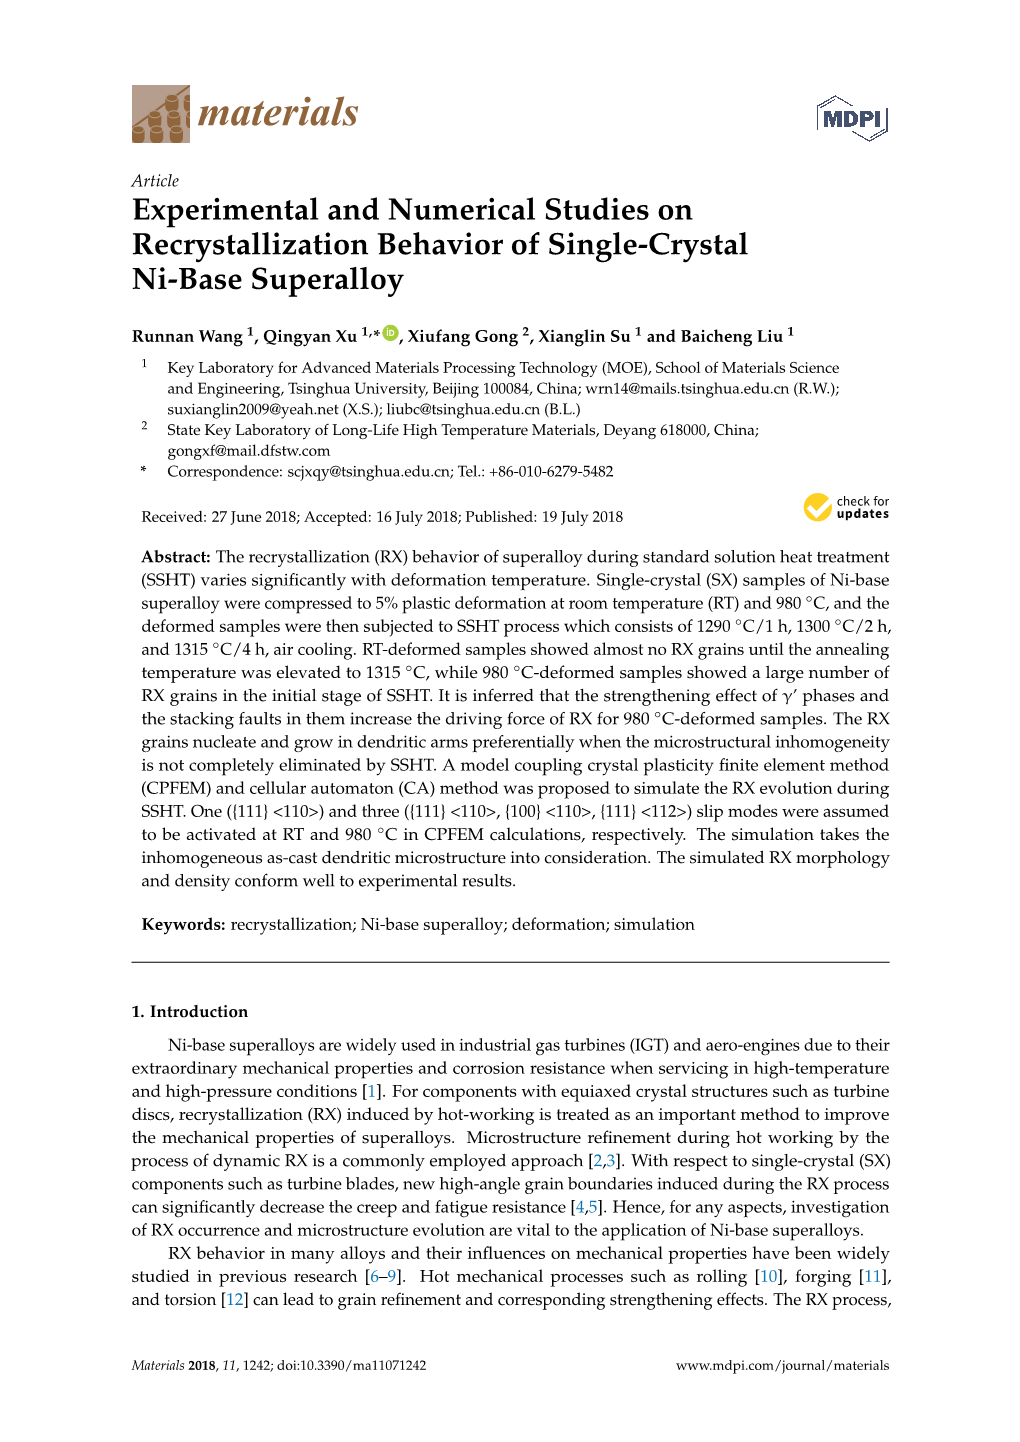 Experimental and Numerical Studies on Recrystallization Behavior of Single-Crystal Ni-Base Superalloy